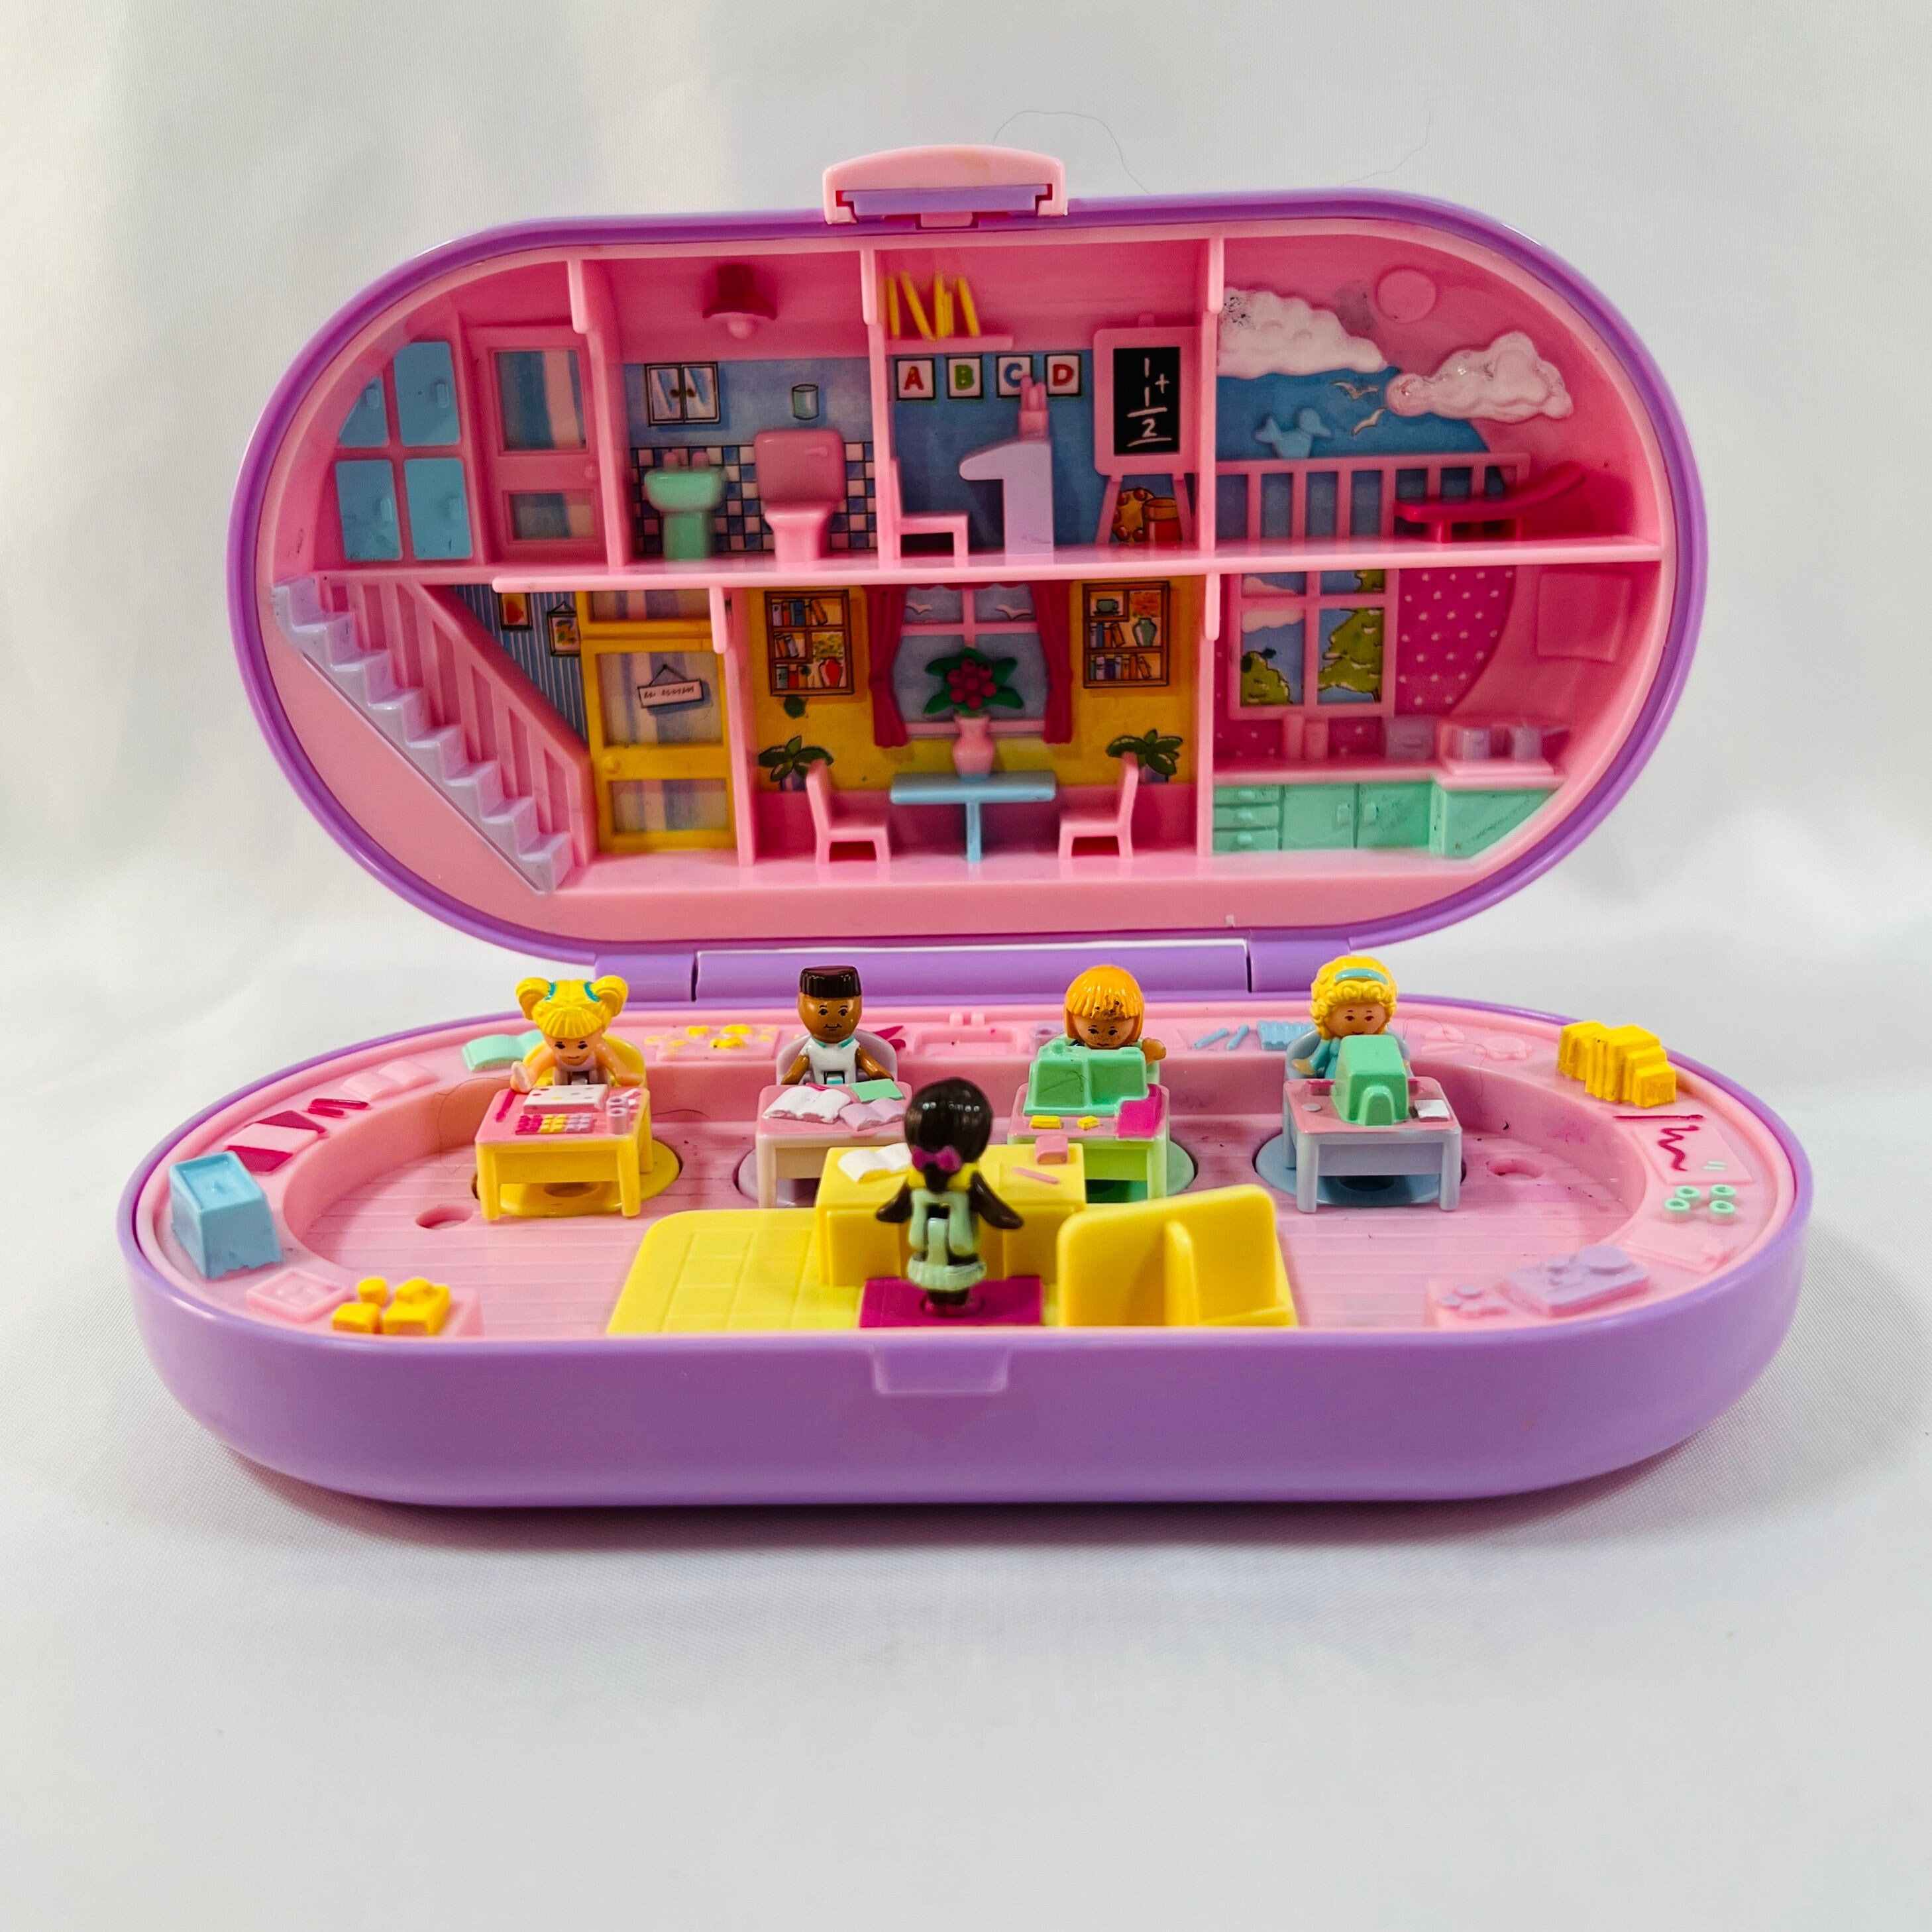 Vintage Polly Pocket Stampin' School Playset. School Stamp Compact